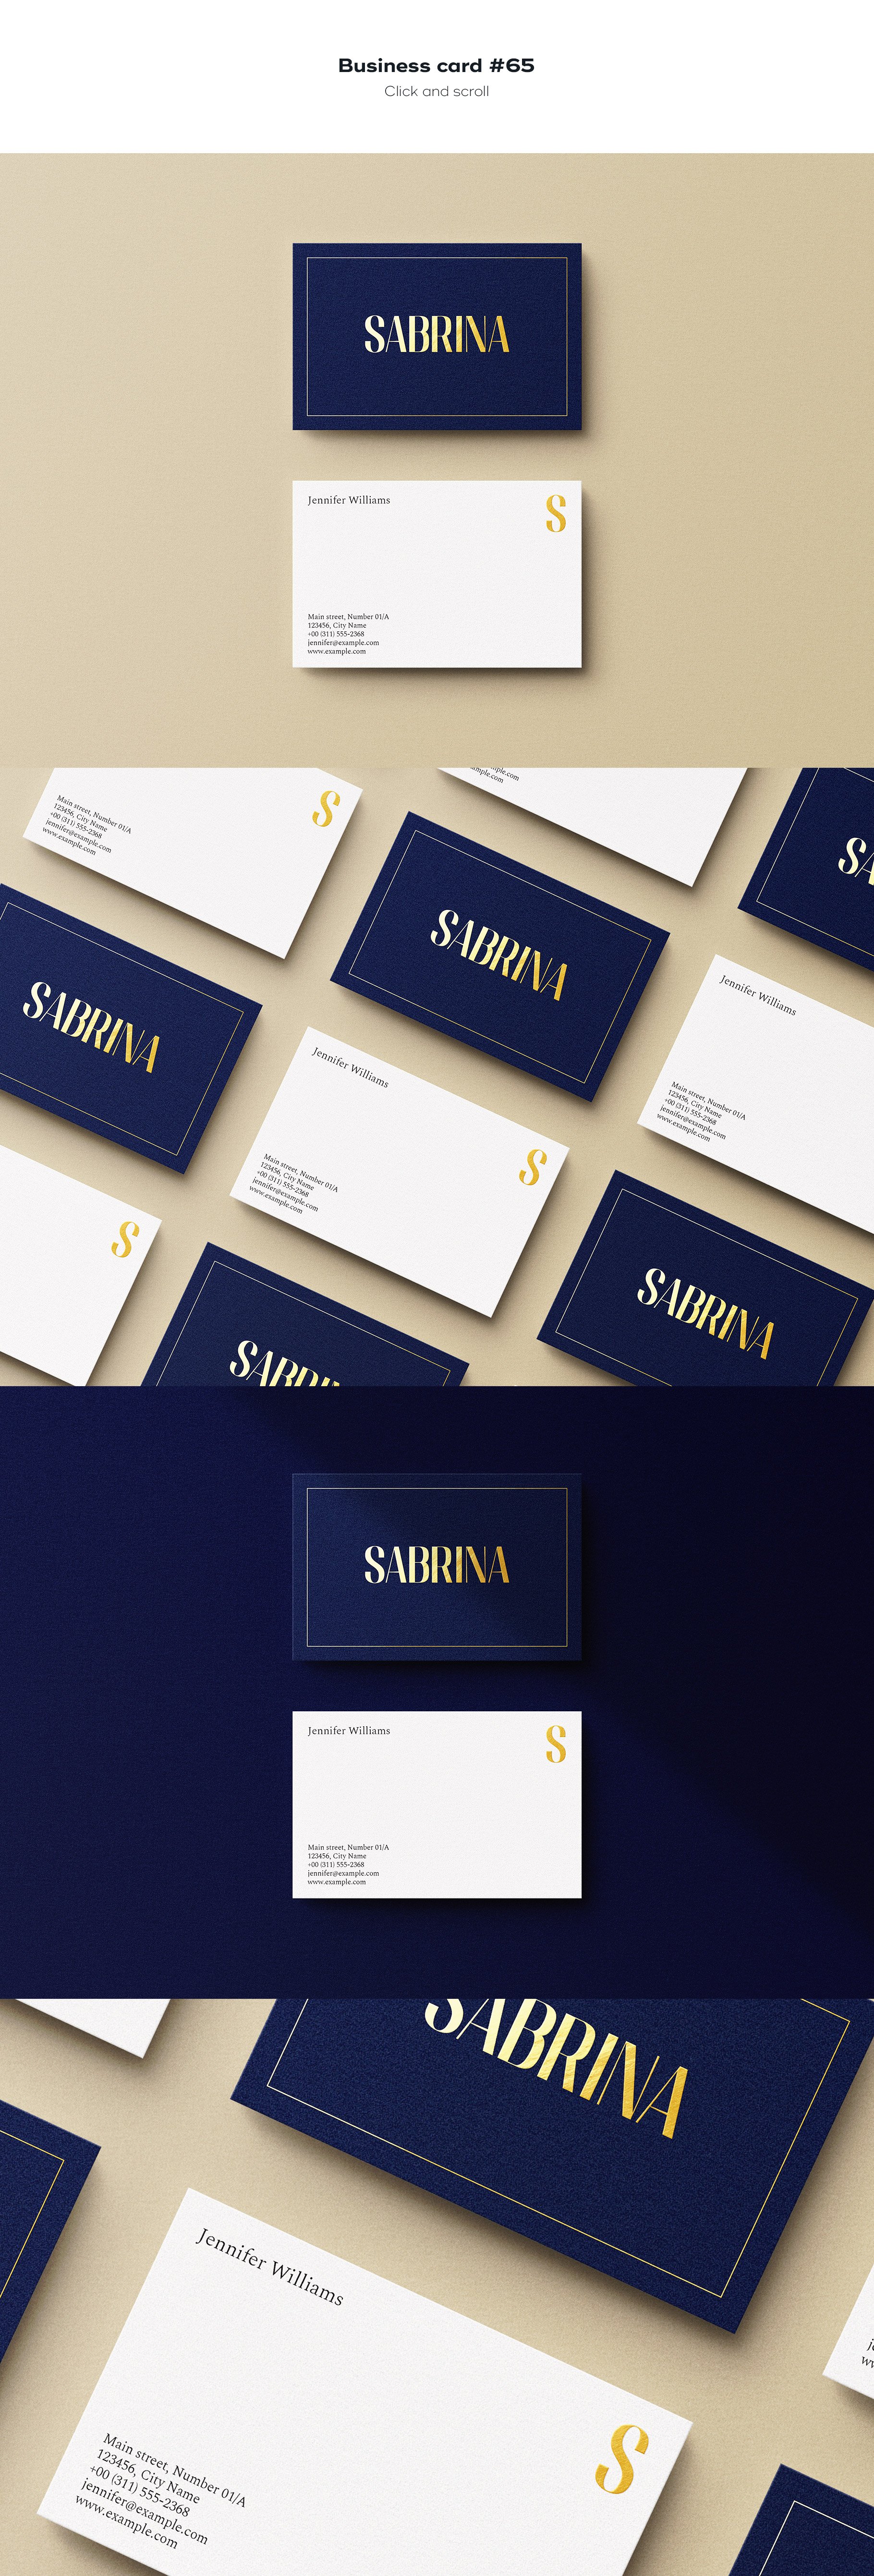 business card 65 112